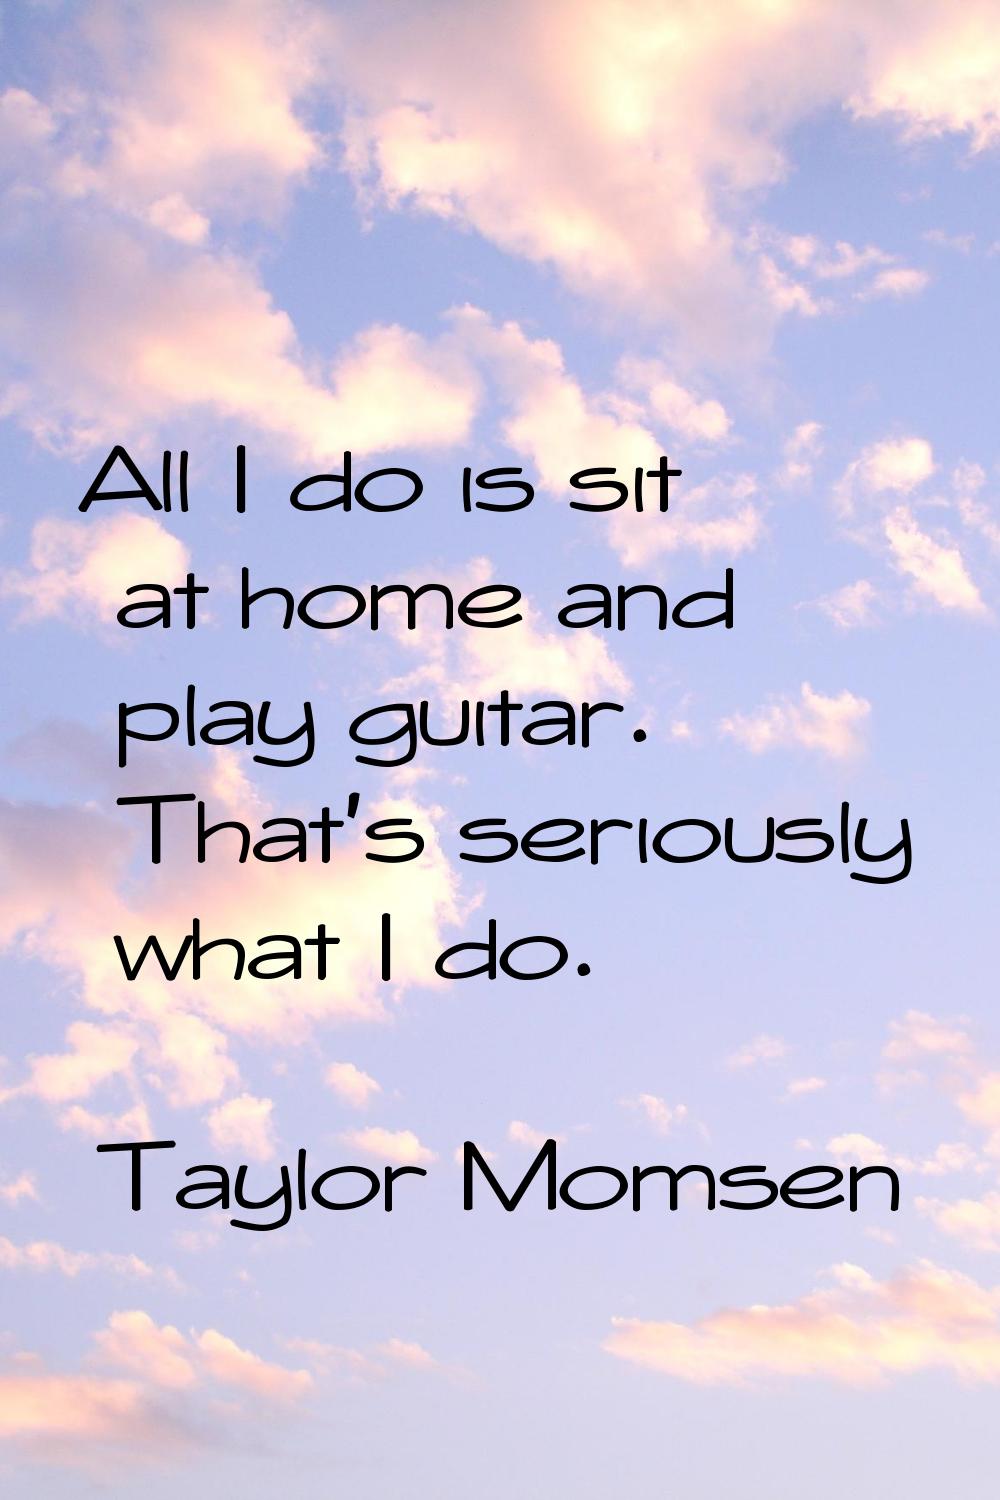 All I do is sit at home and play guitar. That's seriously what I do.